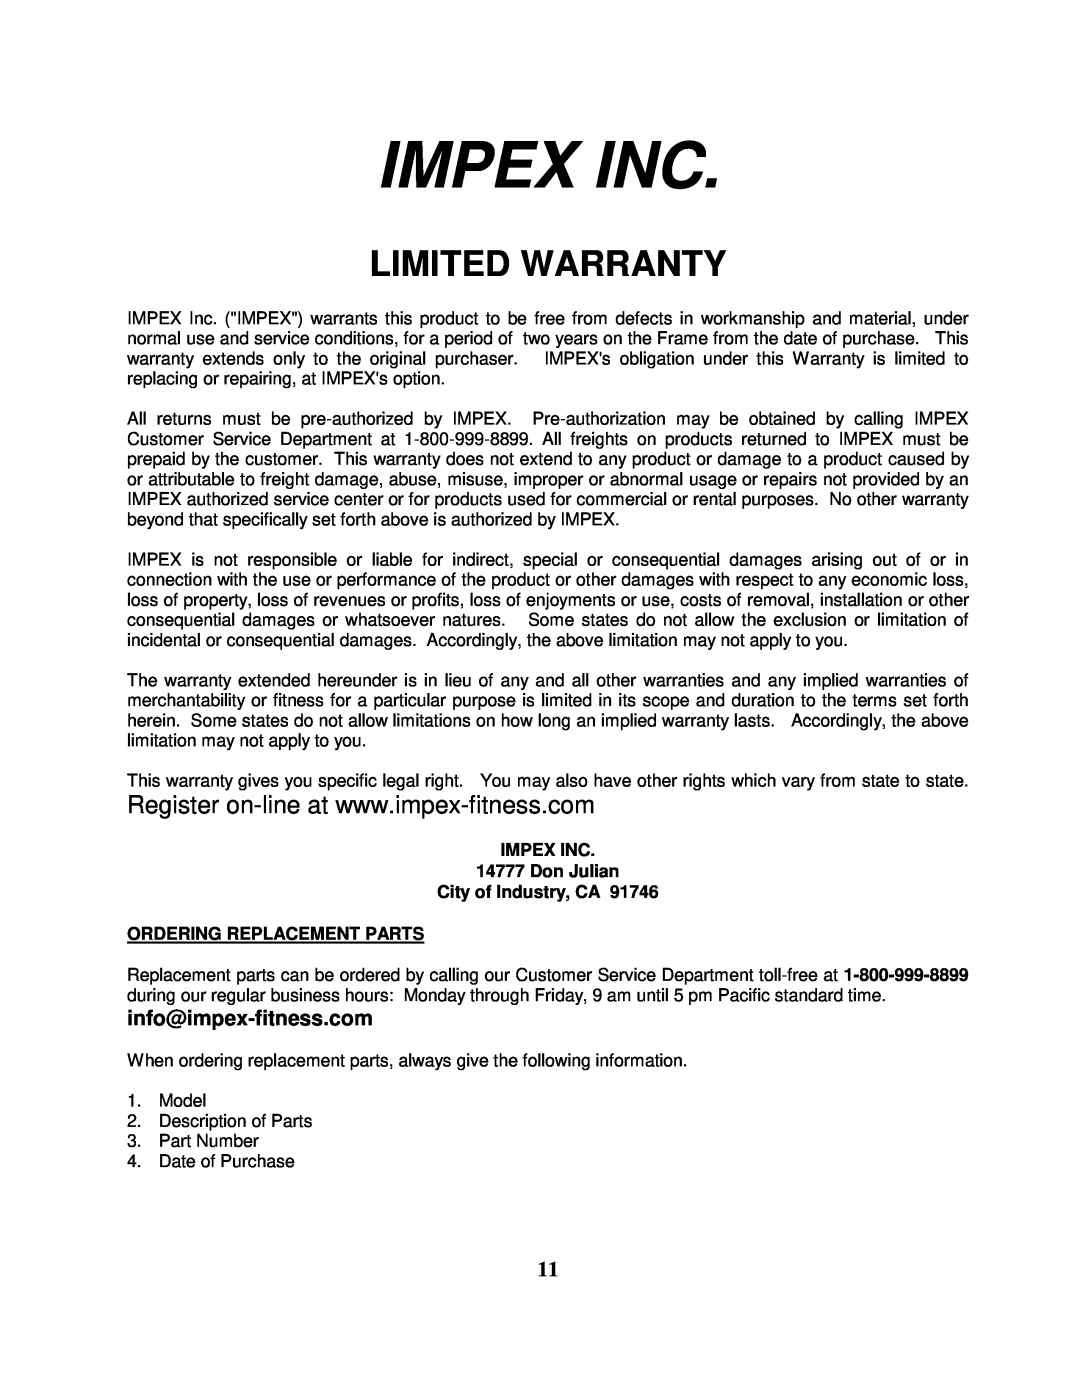 Impex MWB -558 Limited Warranty, Impex Inc, IMPEX INC 14777 Don Julian City of Industry, CA, Ordering Replacement Parts 